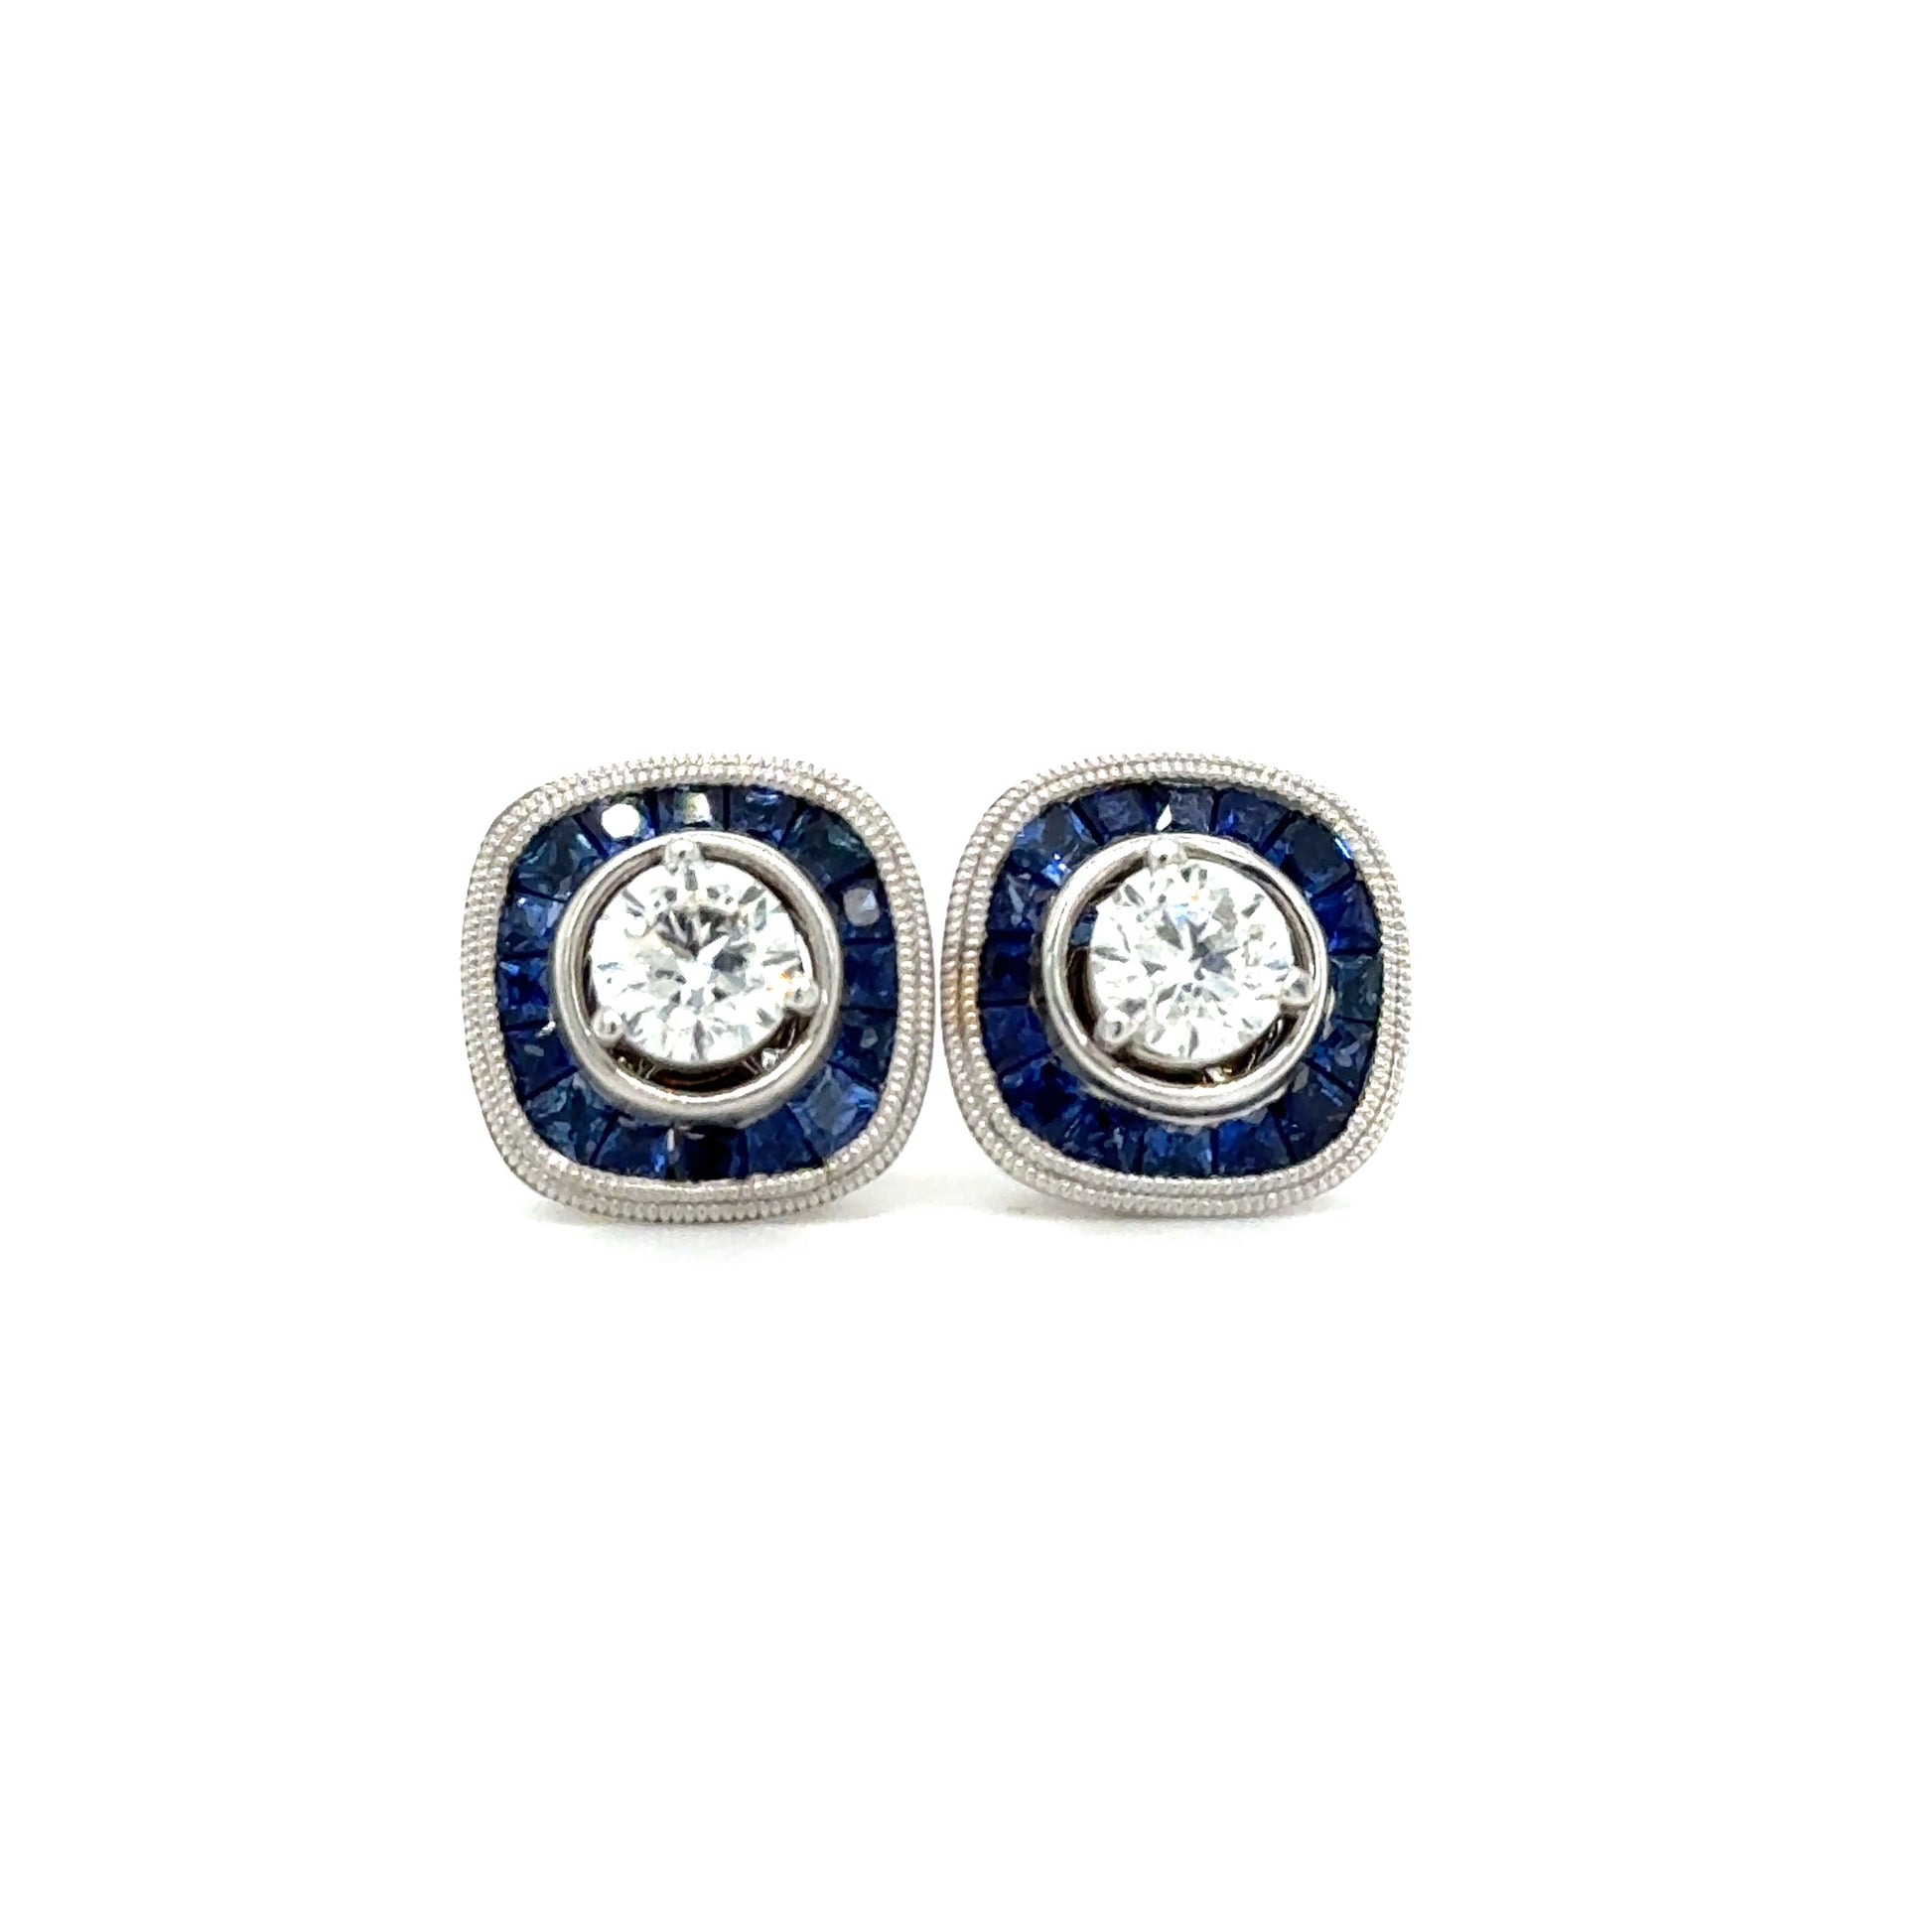 Diamond 0.72ctw Stud Earrings with Blue Sapphire Jackets in 14K White Gold Front View